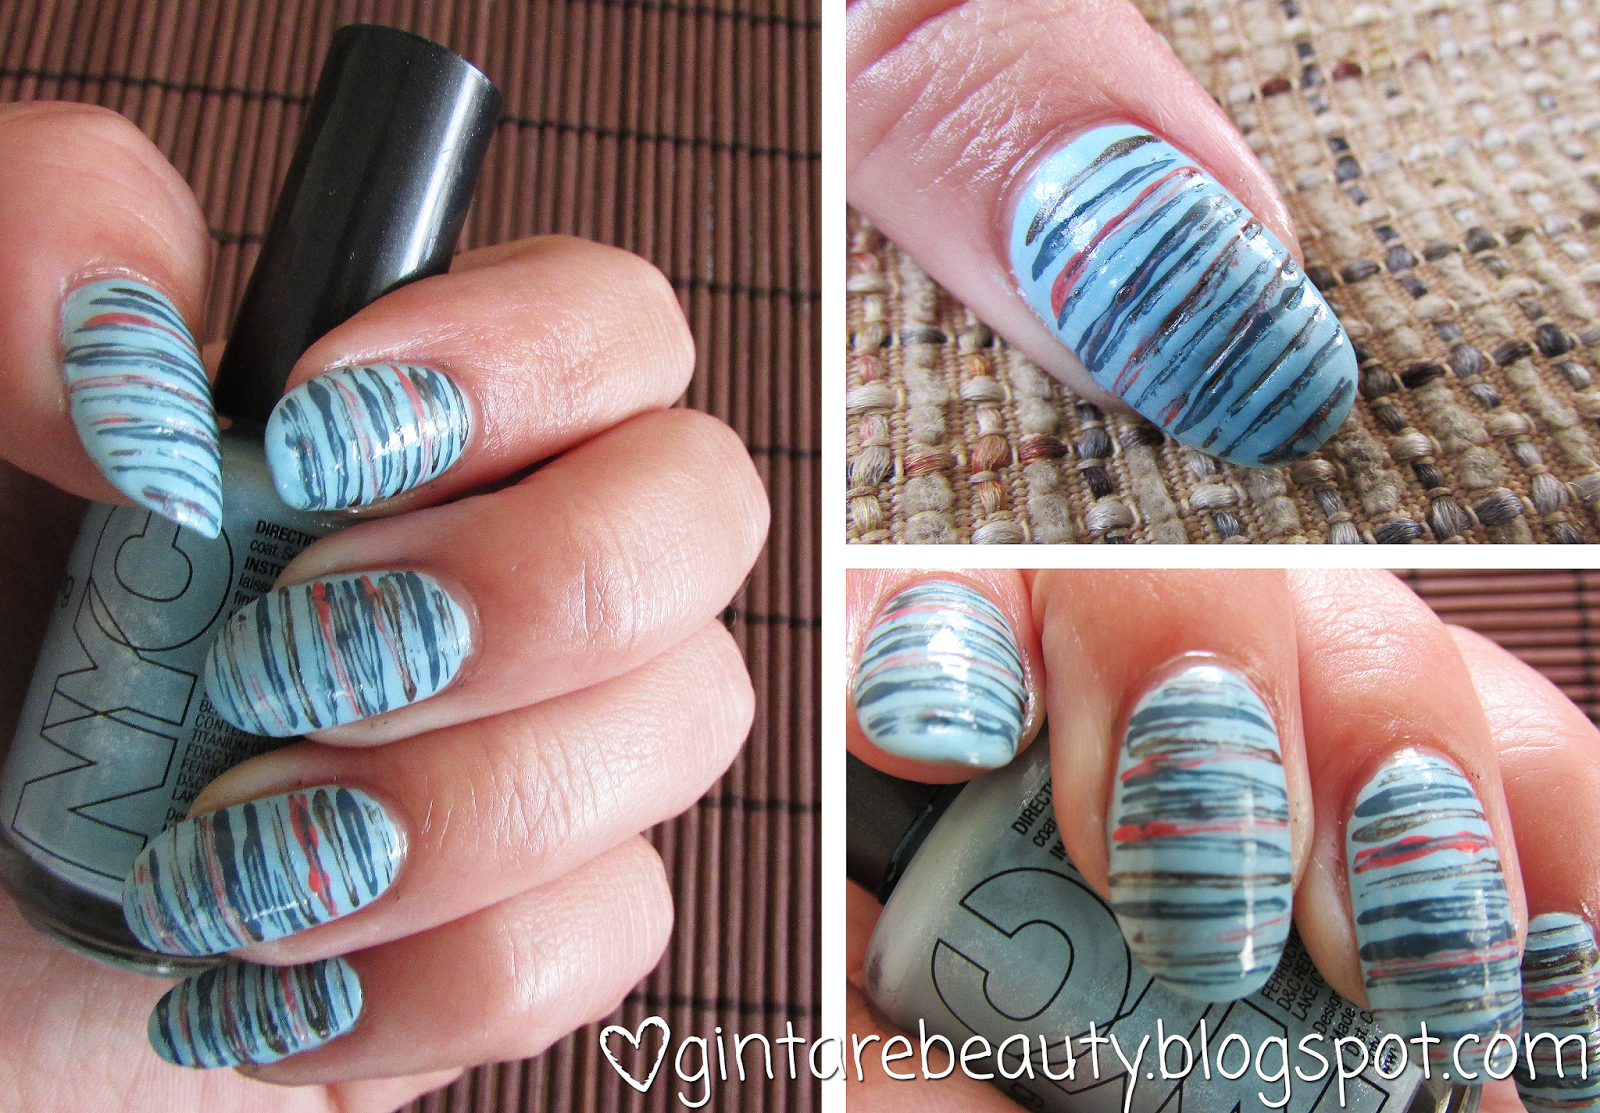 Let's talk beauty!: Stripped nails